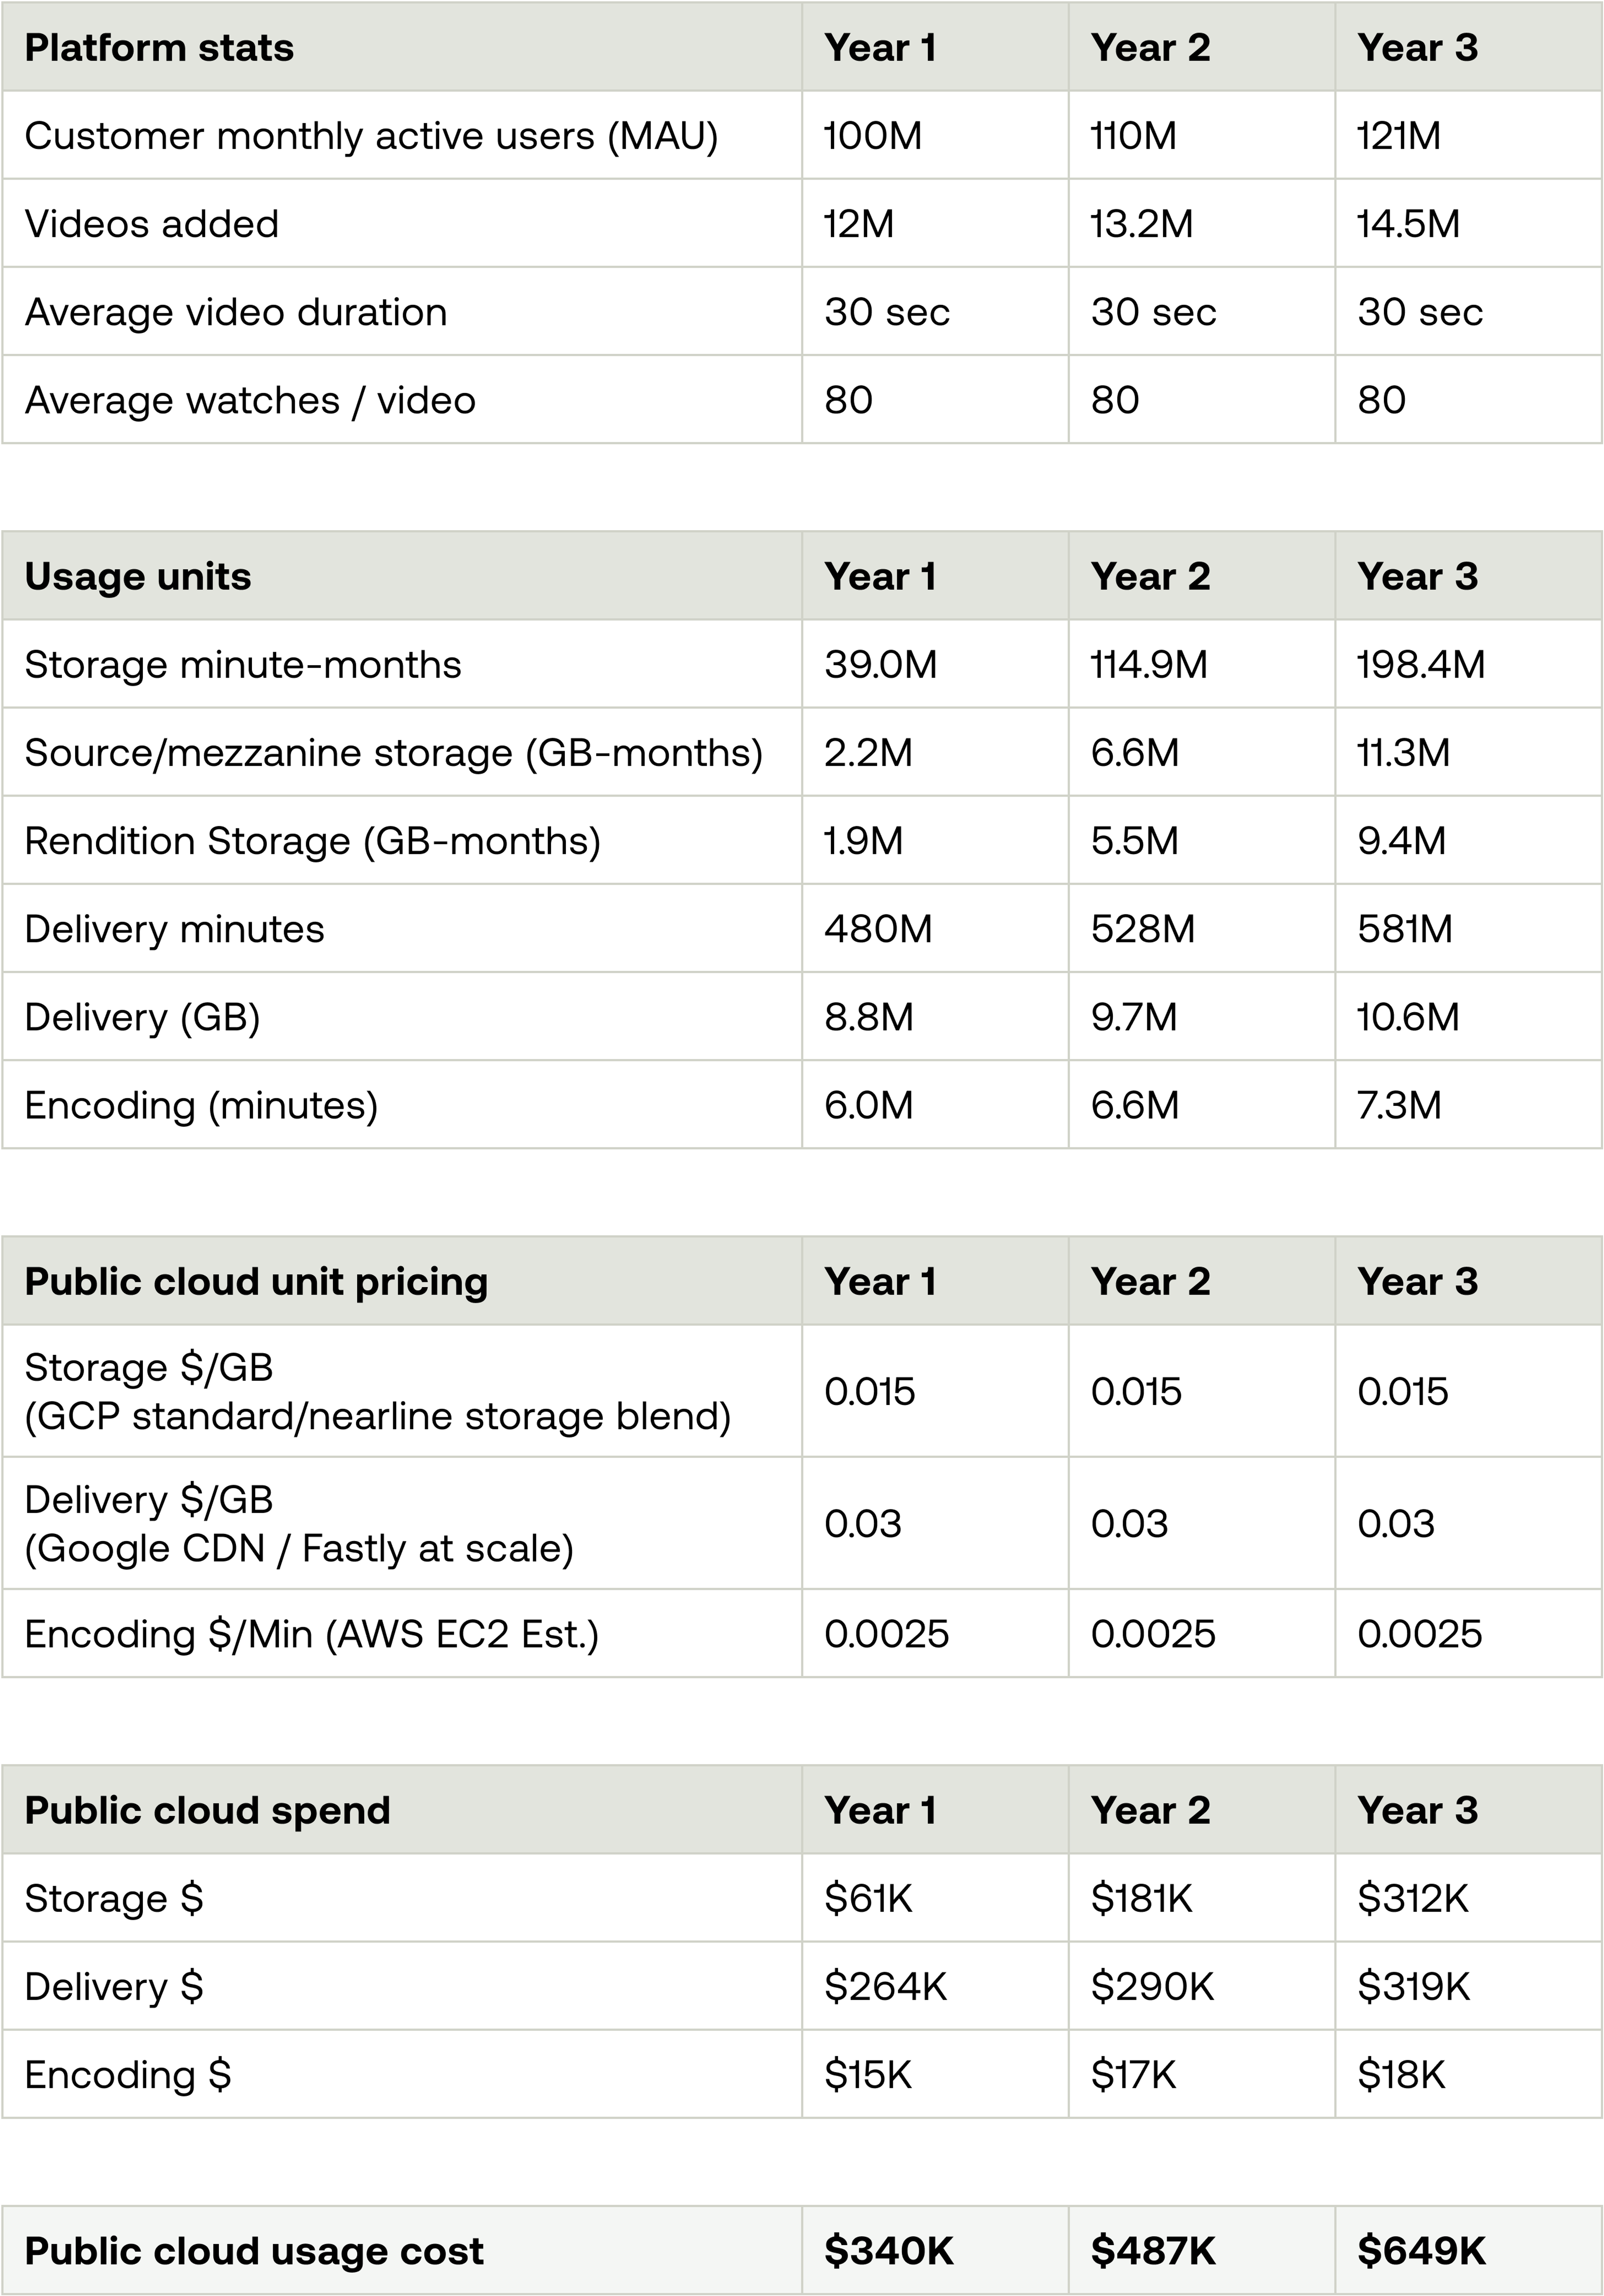 Table breaking down the cost of platform stats, usage units, public cloud unit pricing, and public cloud spend over 3 years. Total for year 1 is $340K; total for year 2 is $487K, total for year 3 is $649K.